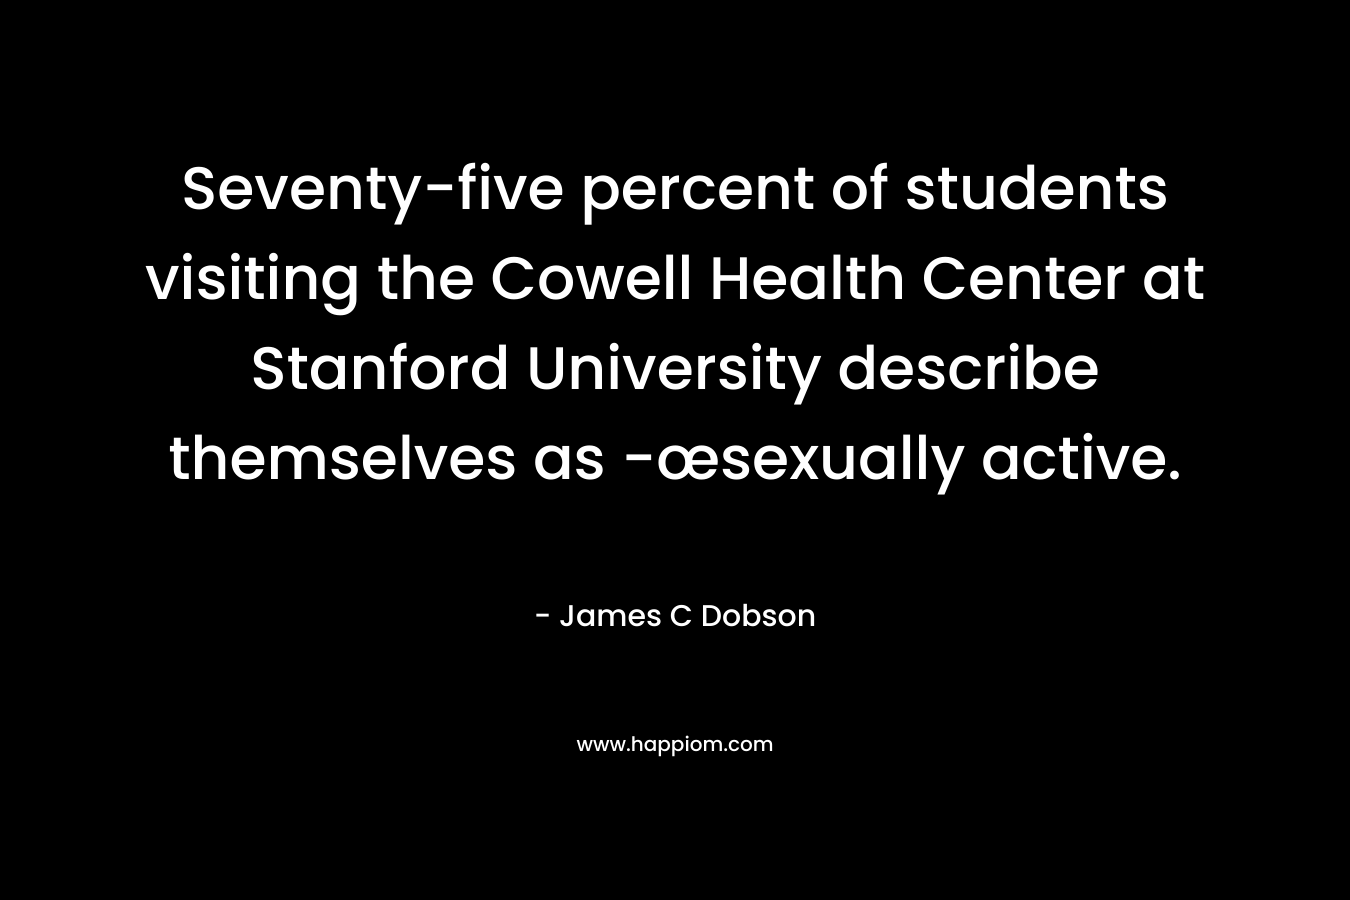 Seventy-five percent of students visiting the Cowell Health Center at Stanford University describe themselves as -œsexually active. – James C Dobson